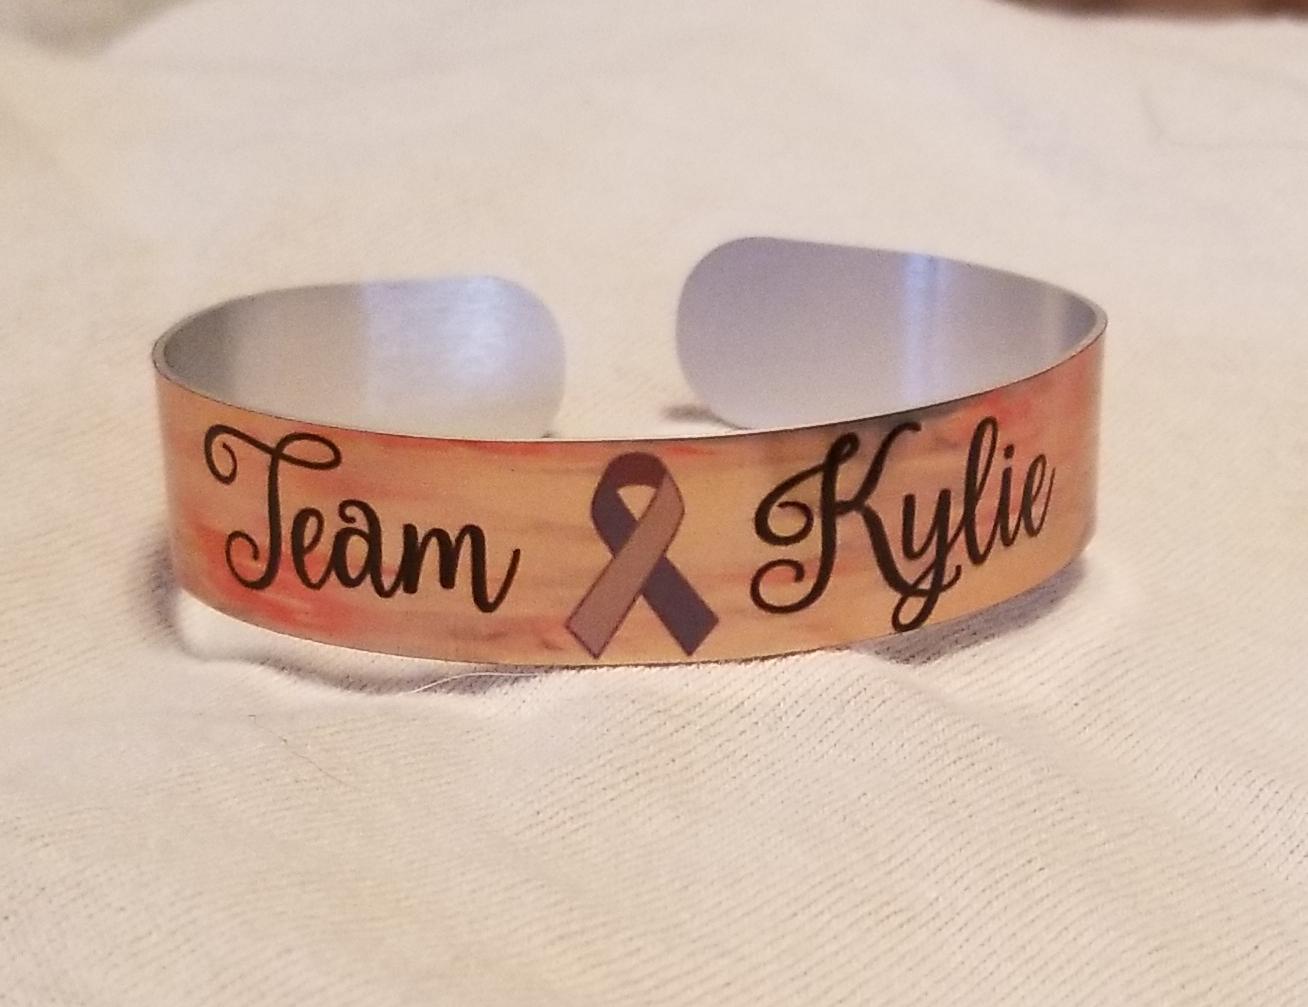 Team Kylie made with sublimation printing